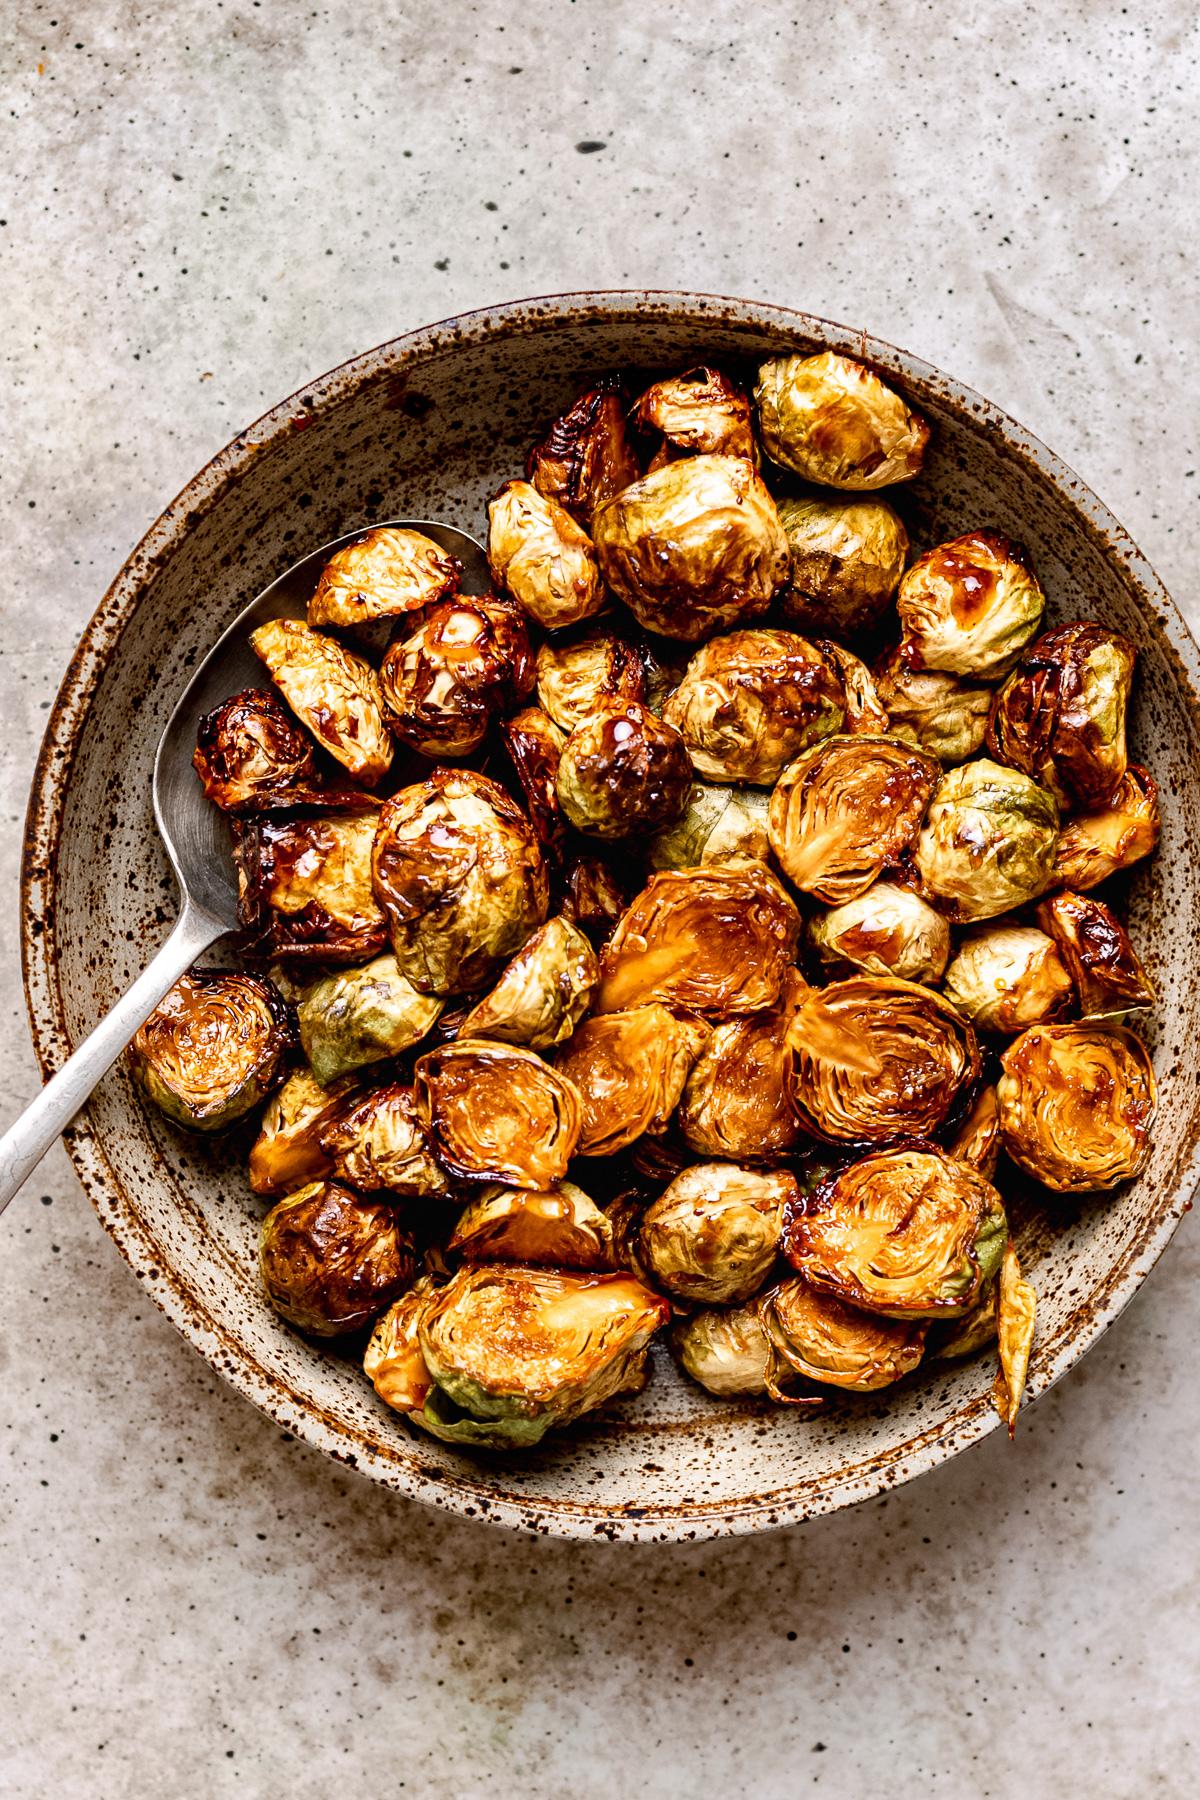 Crispy air fryer Brussels sprouts with balsamic glaze.